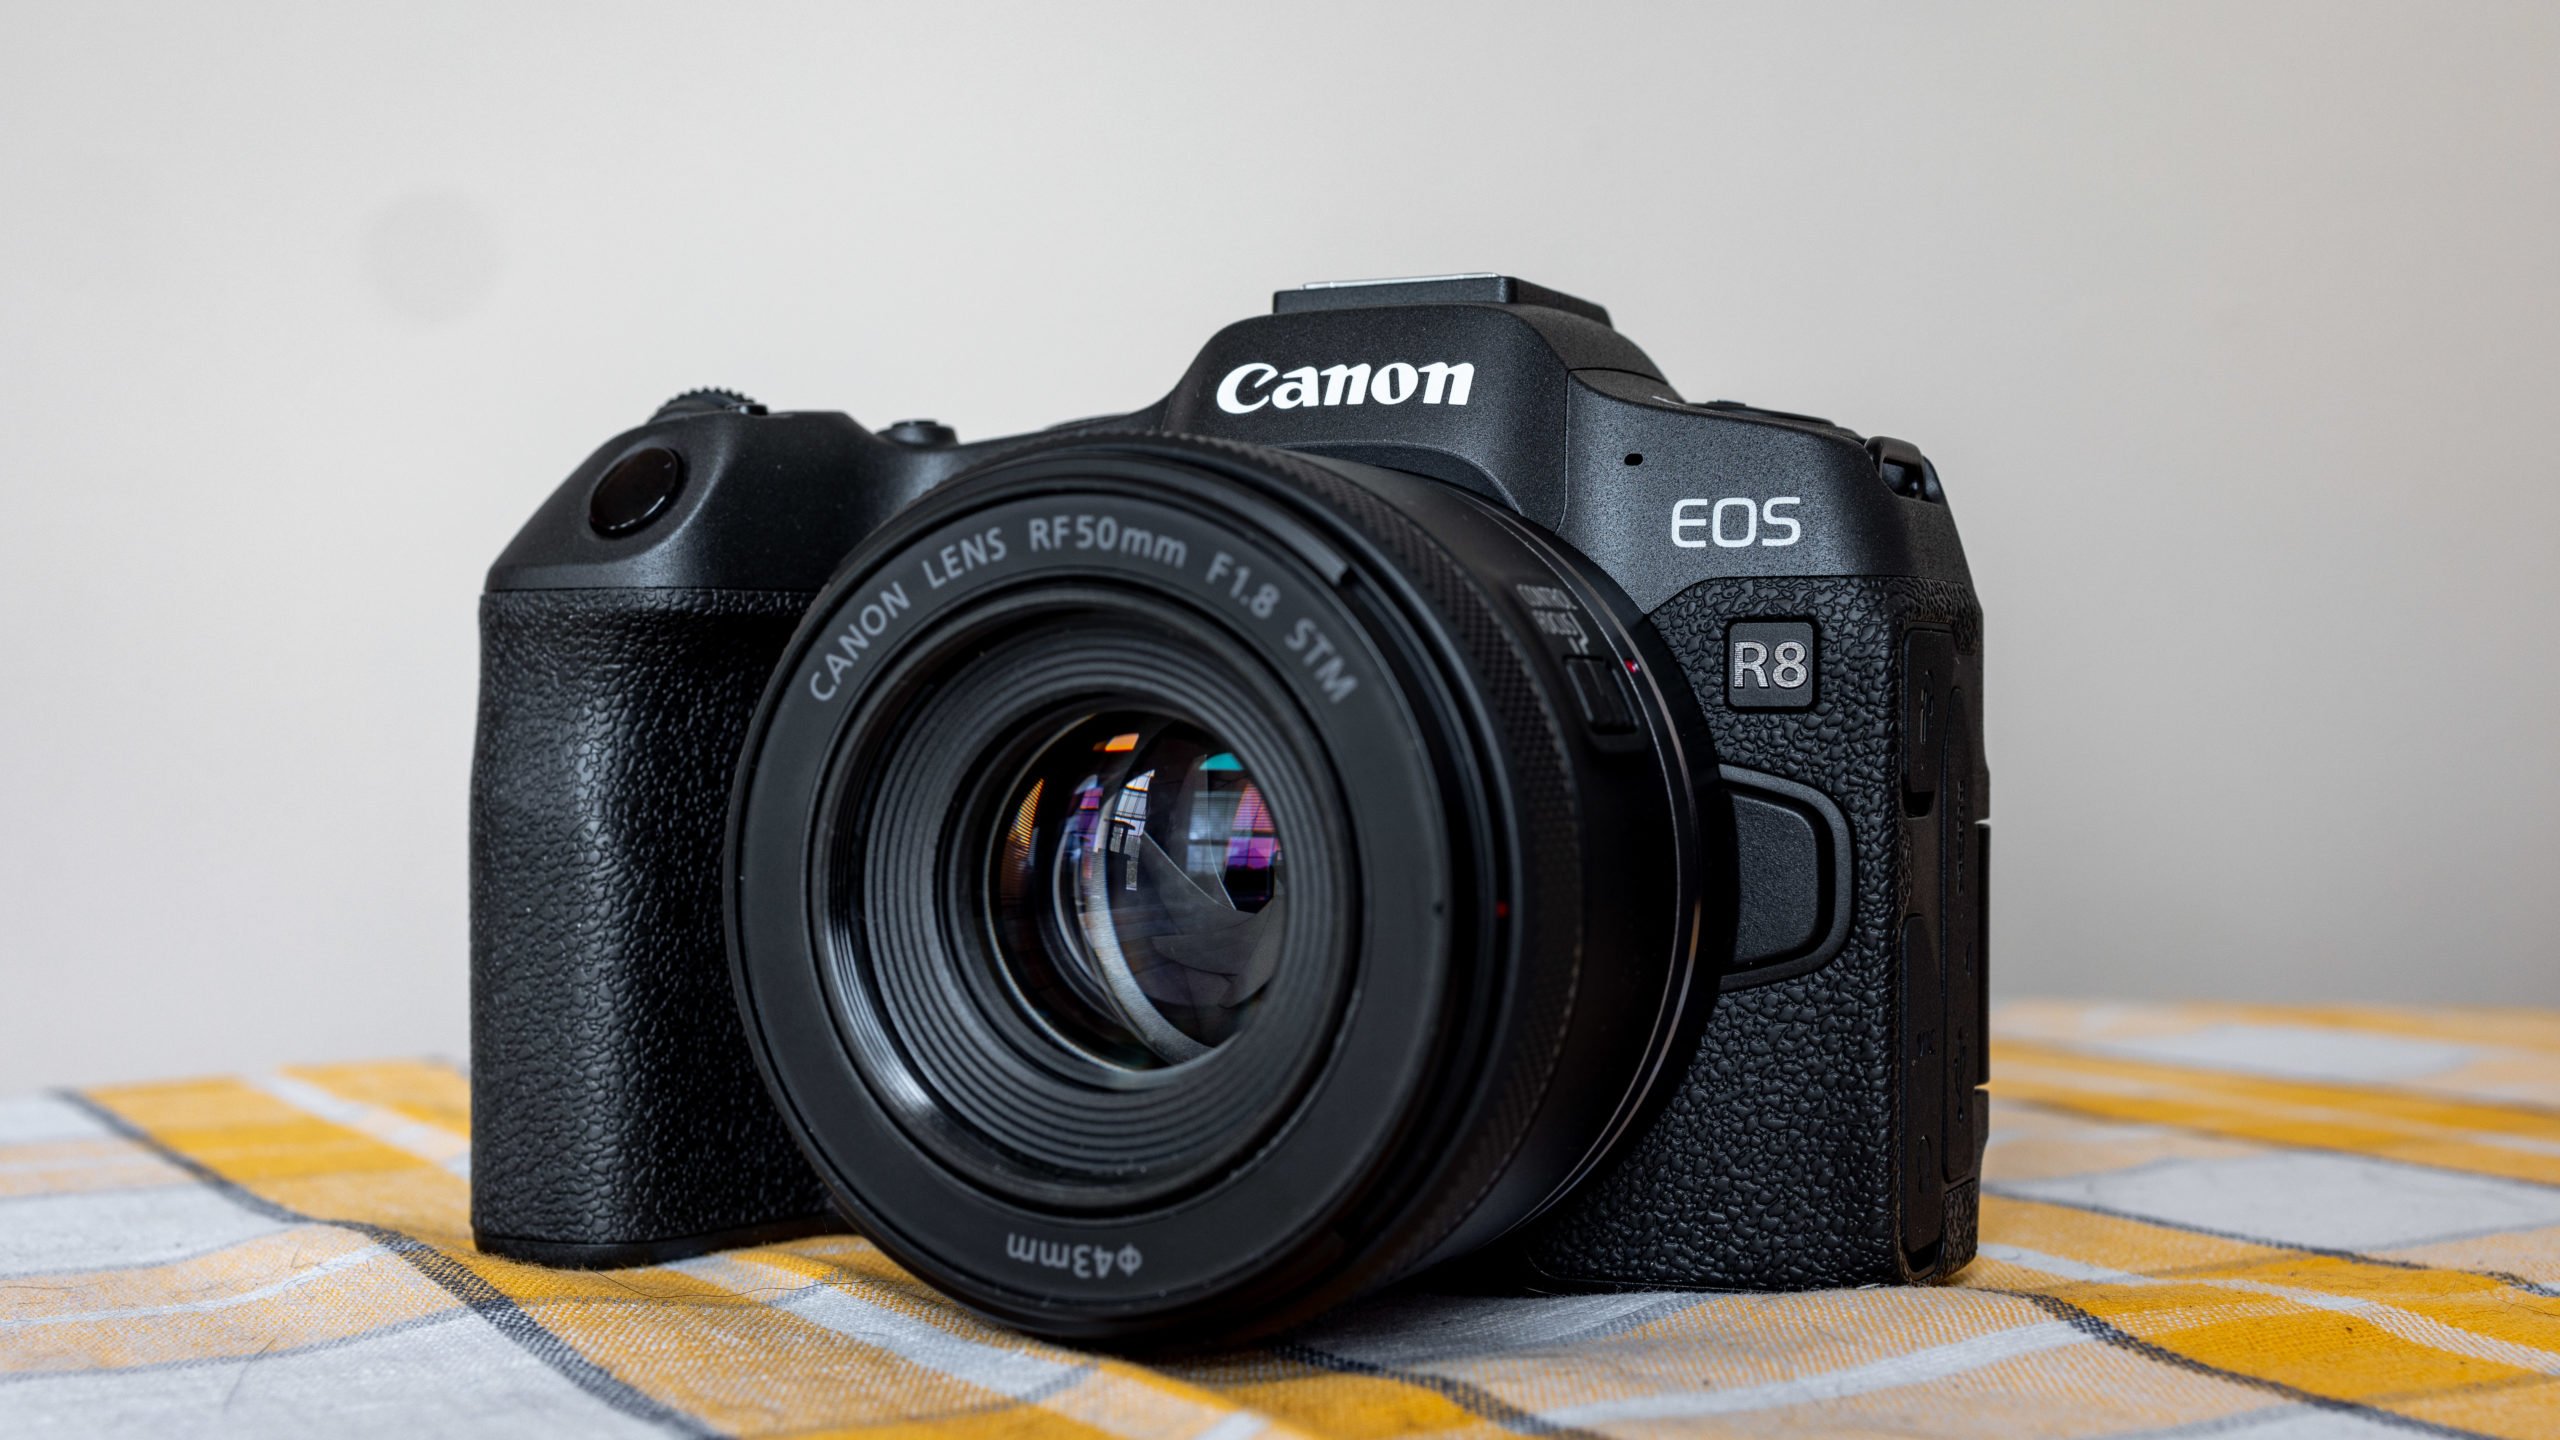 Got a new camera? Change these settings before you shoot!: Digital